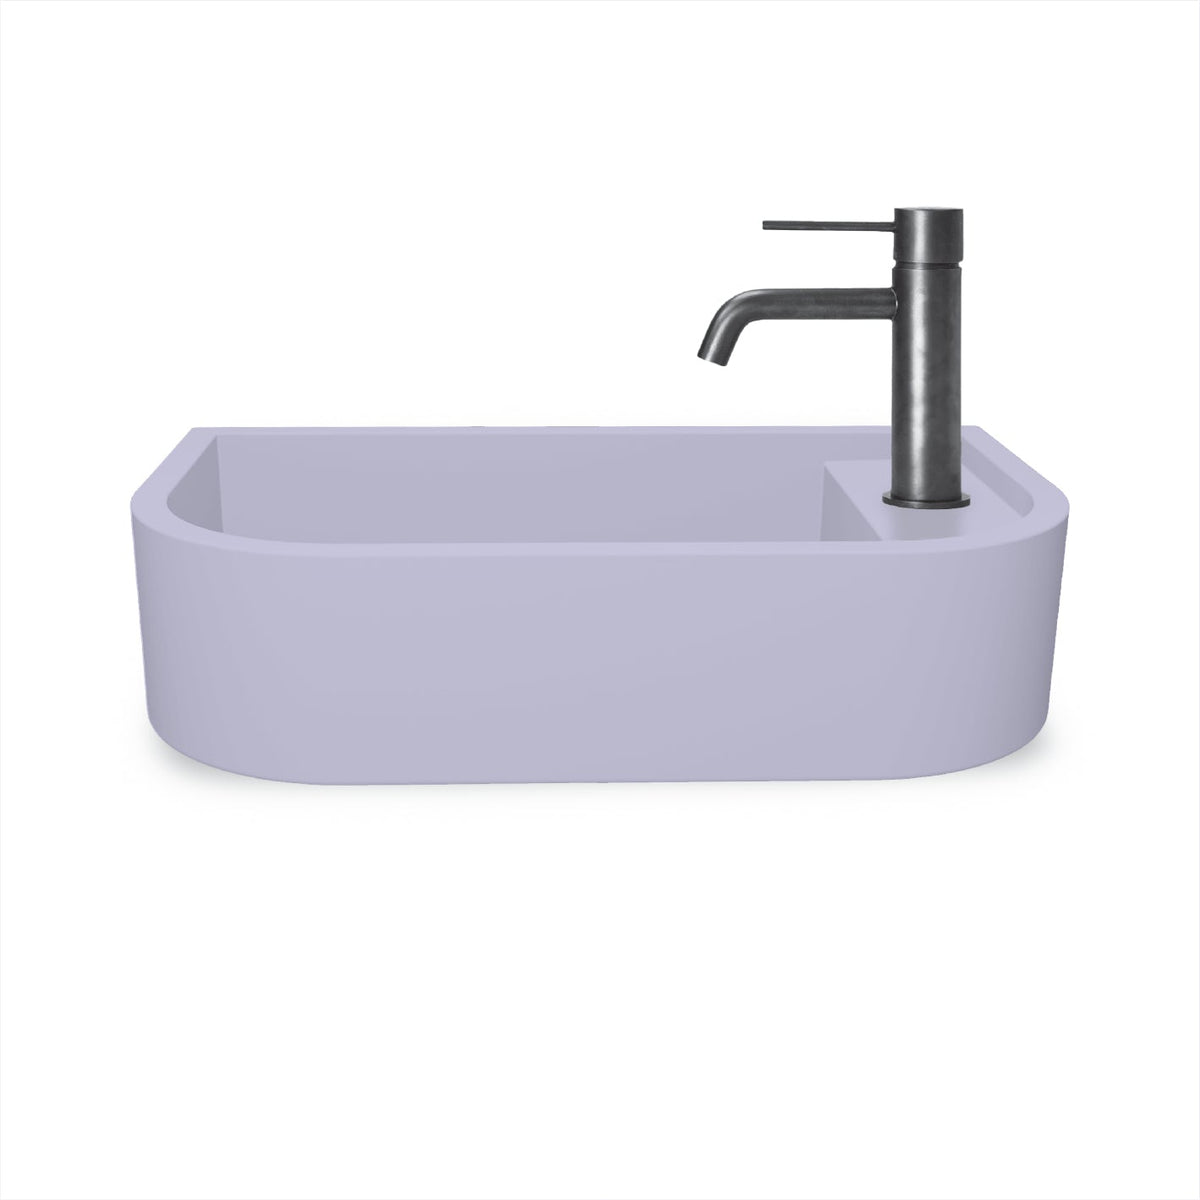 Loop 02 Basin - Overflow - Surface Mount (Lilac,Tap Hole,Black)